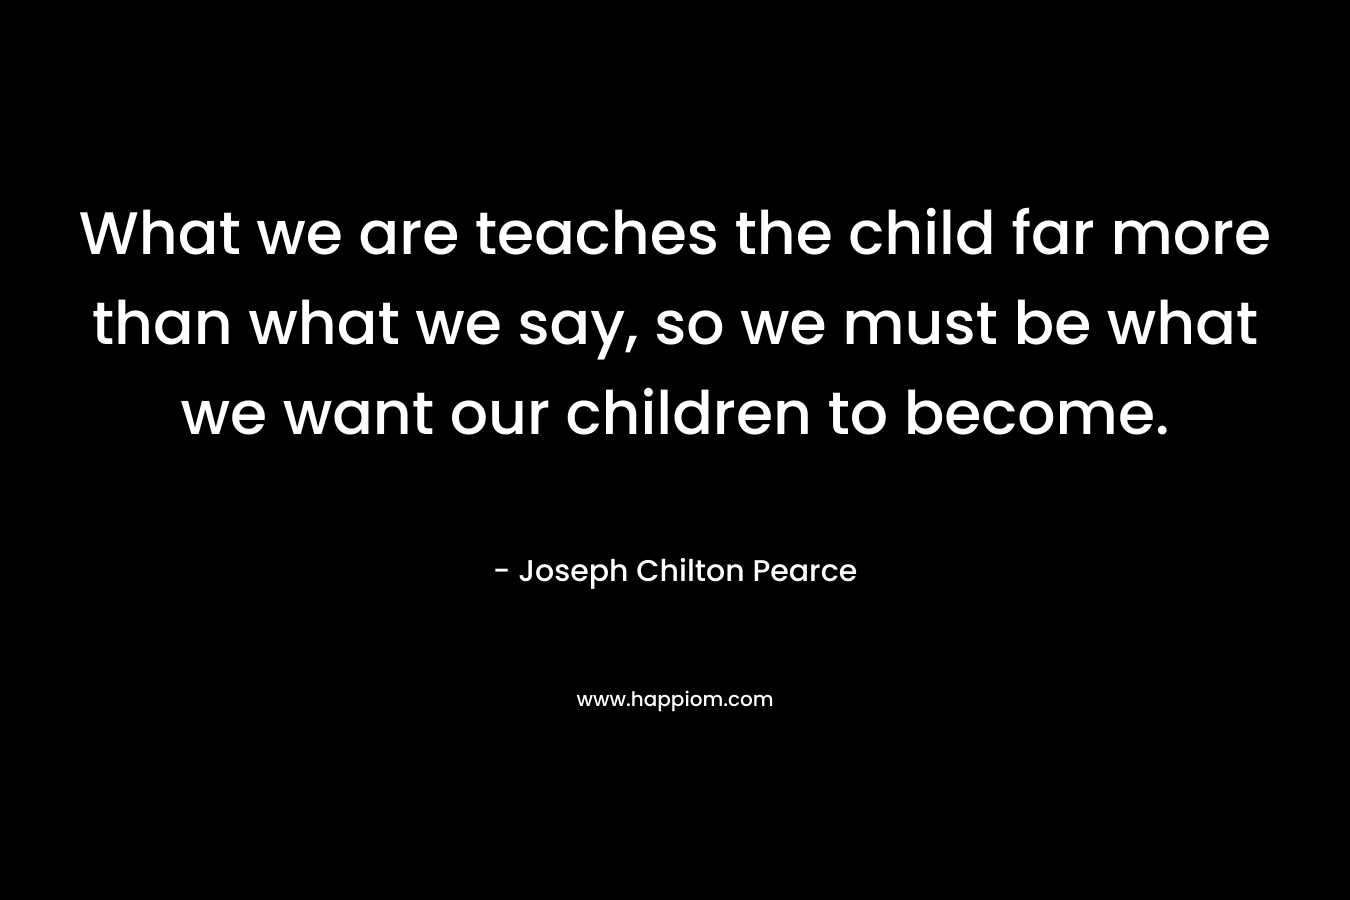 What we are teaches the child far more than what we say, so we must be what we want our children to become. – Joseph Chilton Pearce